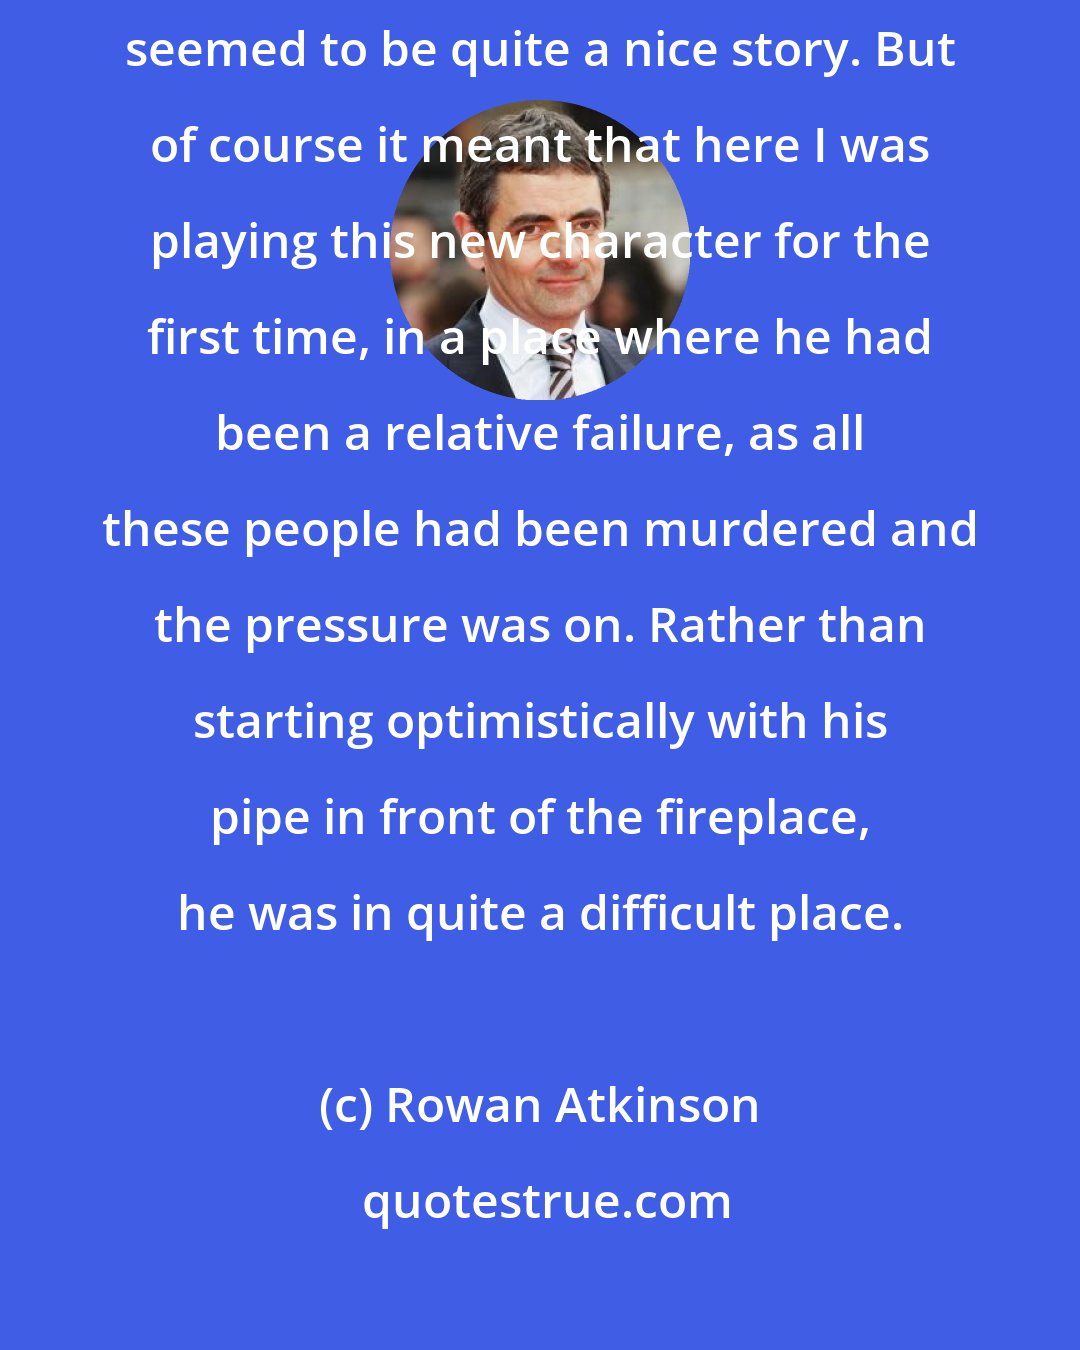 Rowan Atkinson: [Maigret Sets a Trap] was always going to be the first film, and it seemed to be quite a nice story. But of course it meant that here I was playing this new character for the first time, in a place where he had been a relative failure, as all these people had been murdered and the pressure was on. Rather than starting optimistically with his pipe in front of the fireplace, he was in quite a difficult place.